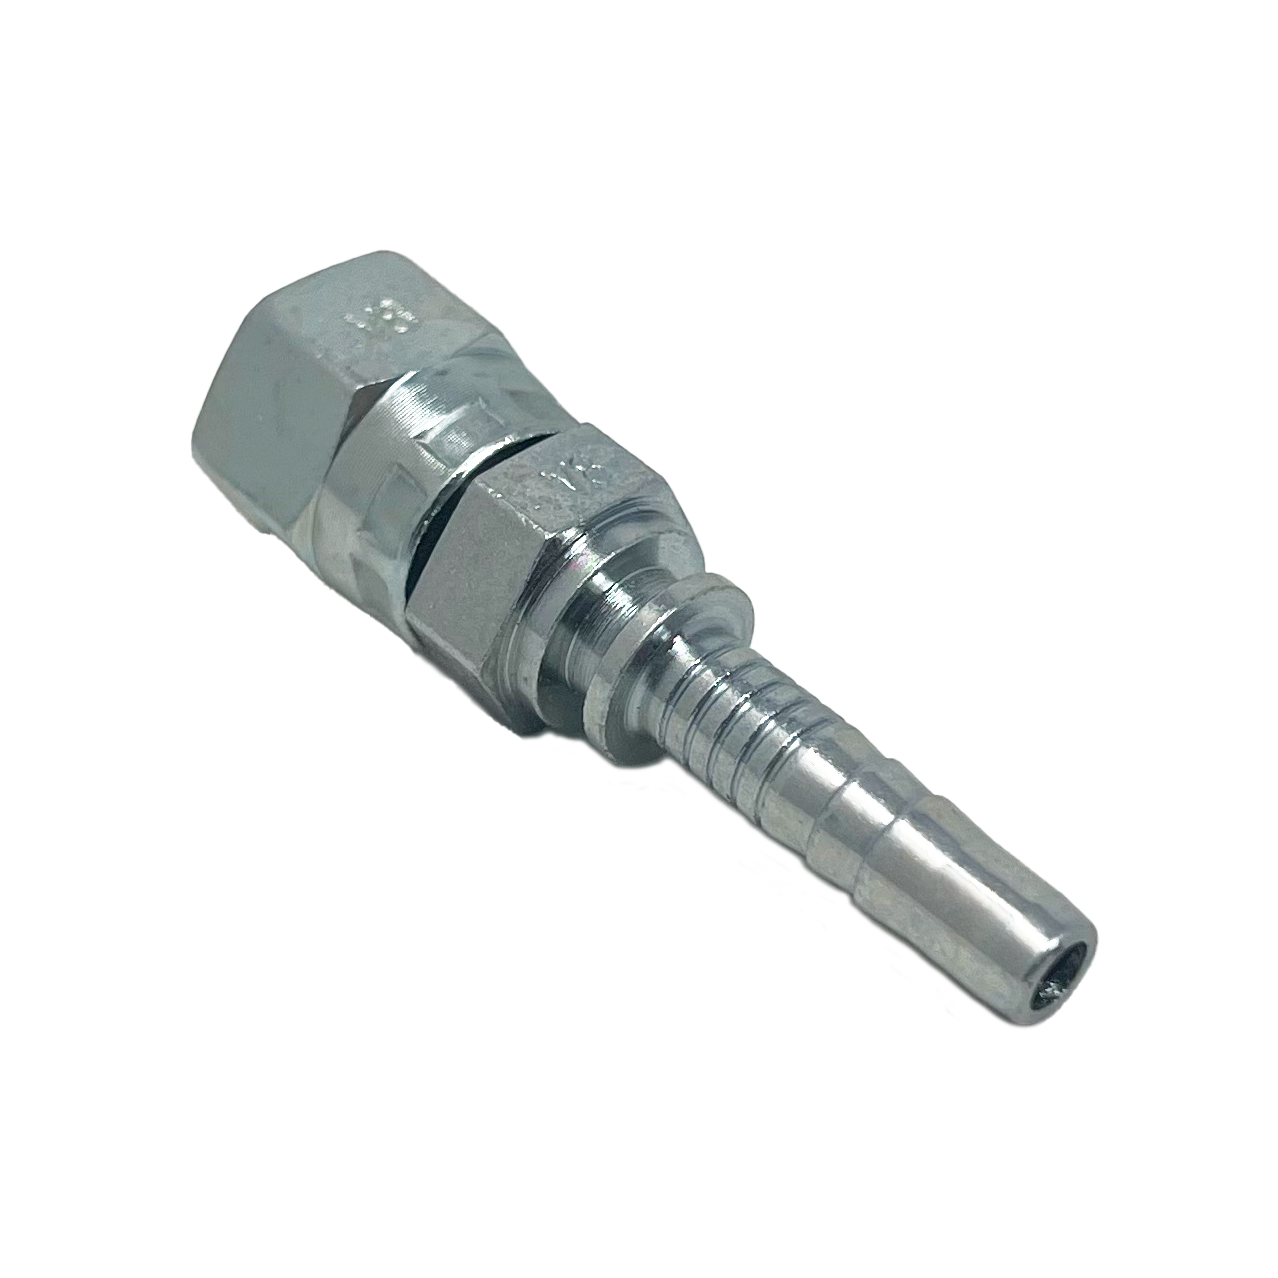 UC-JCFX-0404 : Continental Hose Fitting, 0.25 (1/4") Hose ID, 7/16-20 Female JIC, Straight, Swivel Connection